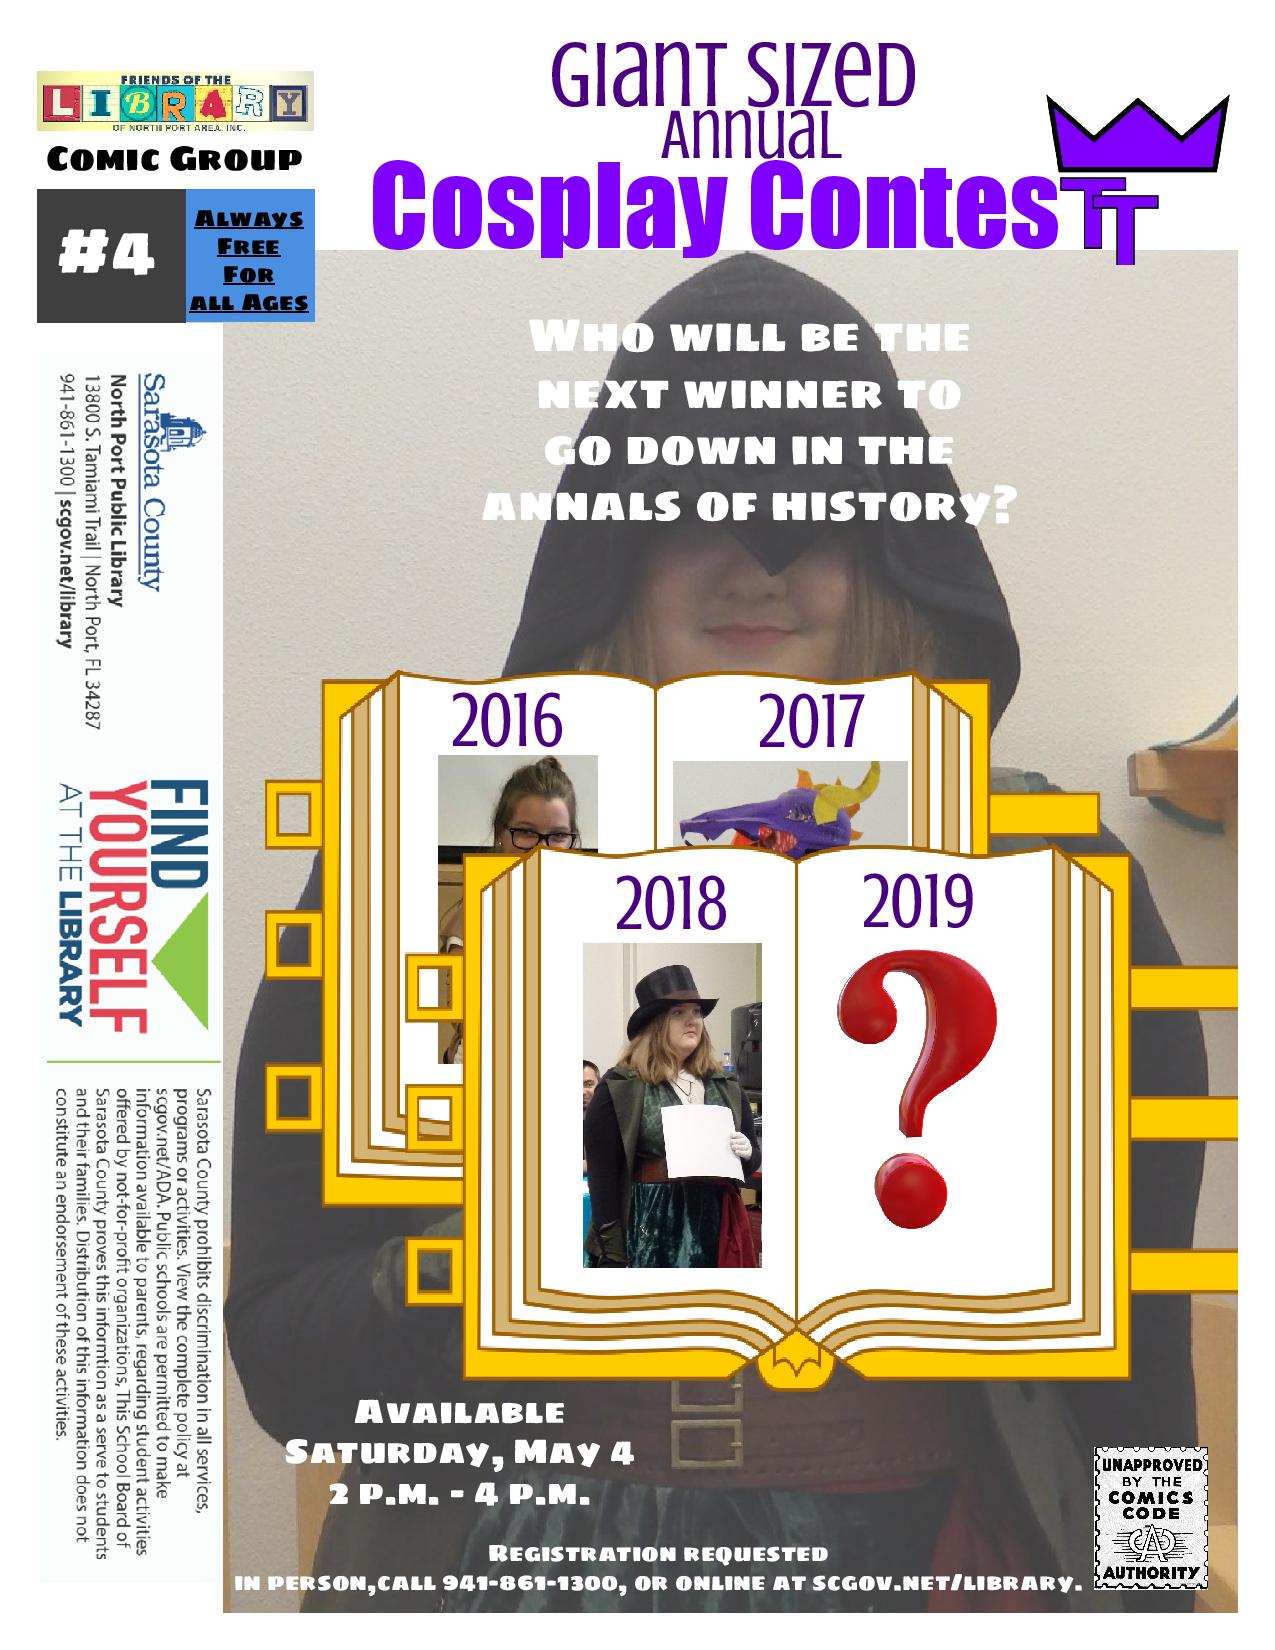 Costume/Cosplay contest for all ages.  Saturday, May 4, 2-4 p.m.